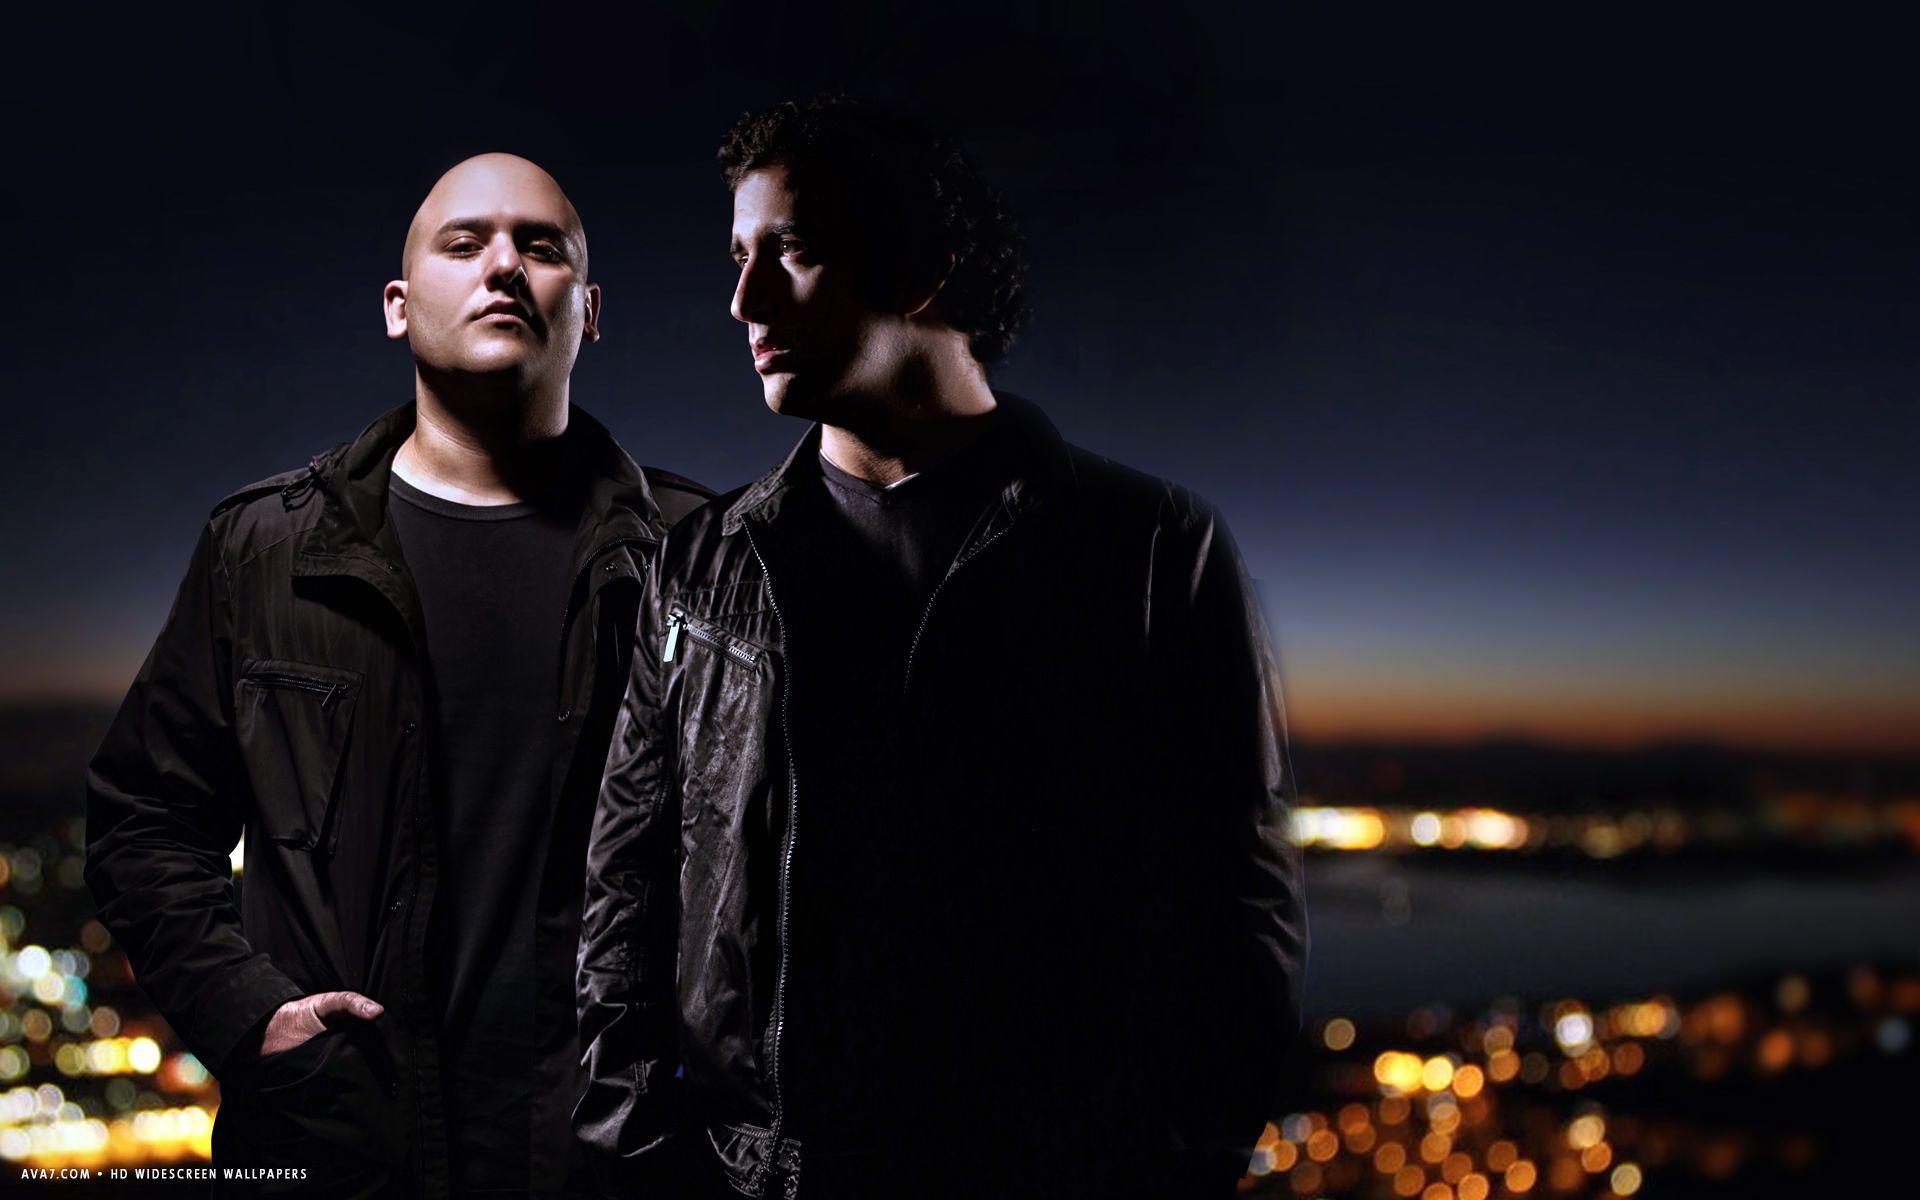 aly and fila music band group HD widescreen wallpaper / music